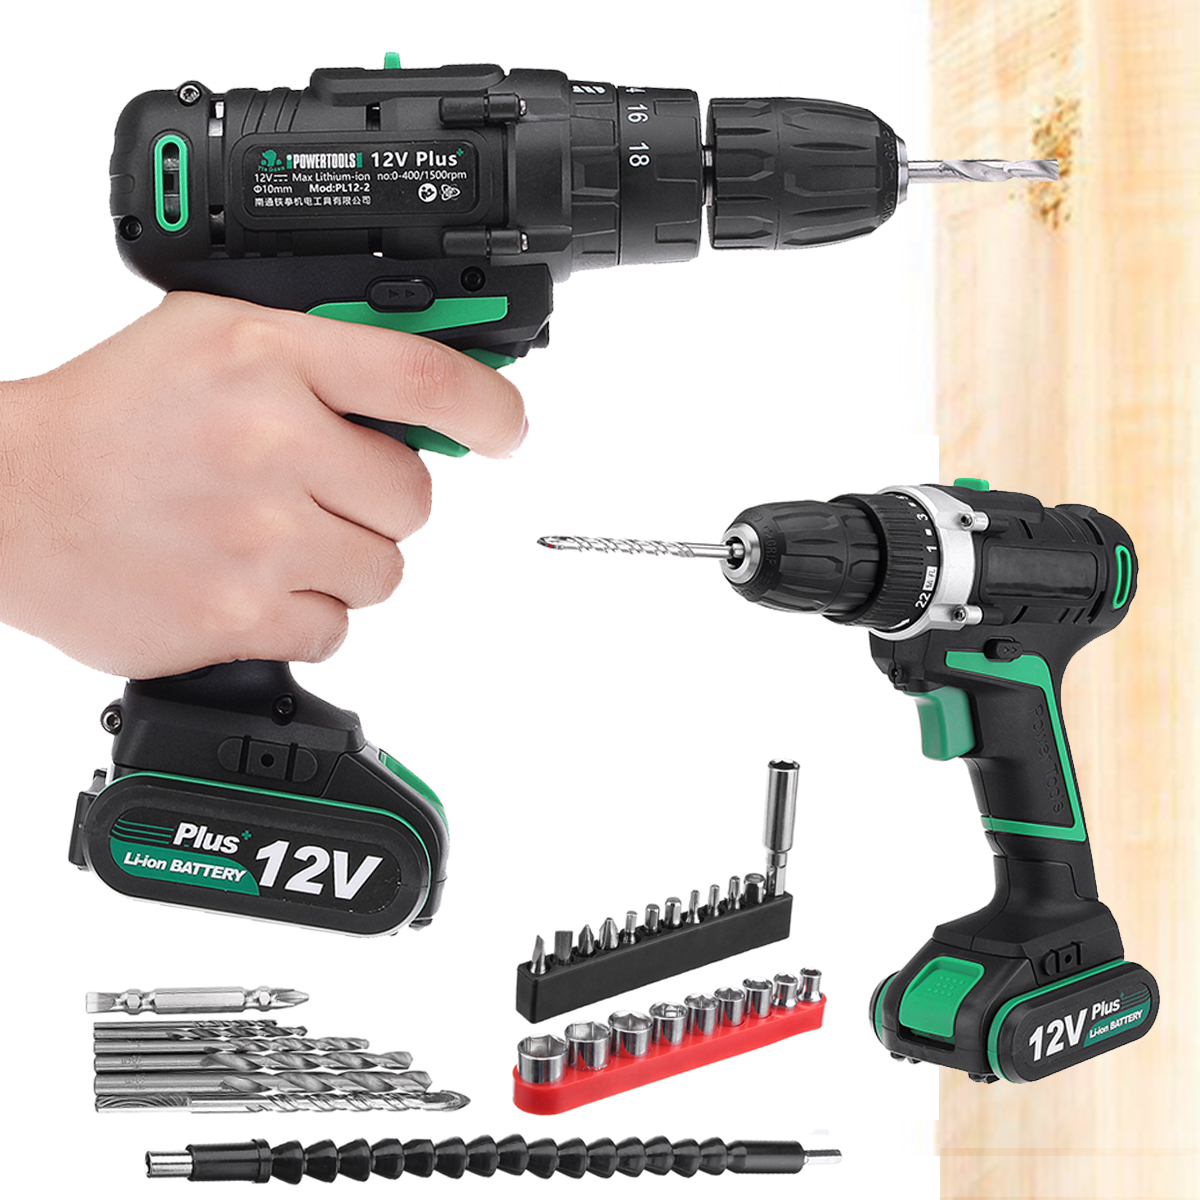 AC100-240V-Electric-Screwdriver-Cordless-Power-Drill-Tools-Dual-Speed-Impact-With-Accessories-1285297-2